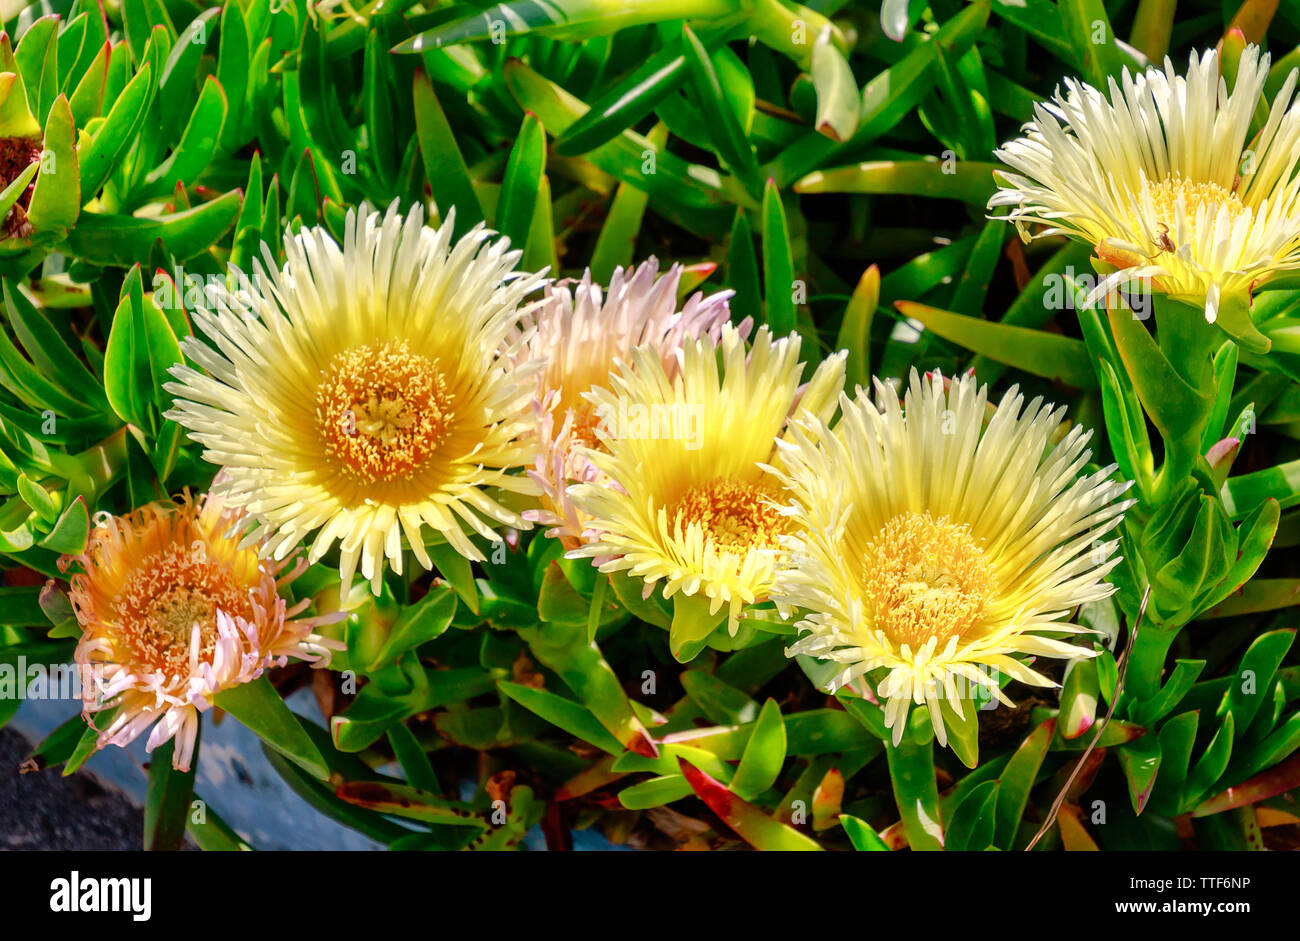 Hottentot Fig (Carpobrotus edulis) large yellow daisy-like flower native to South Africa. It is also known as Ice plant, highway ice plant or pigface. Stock Photo